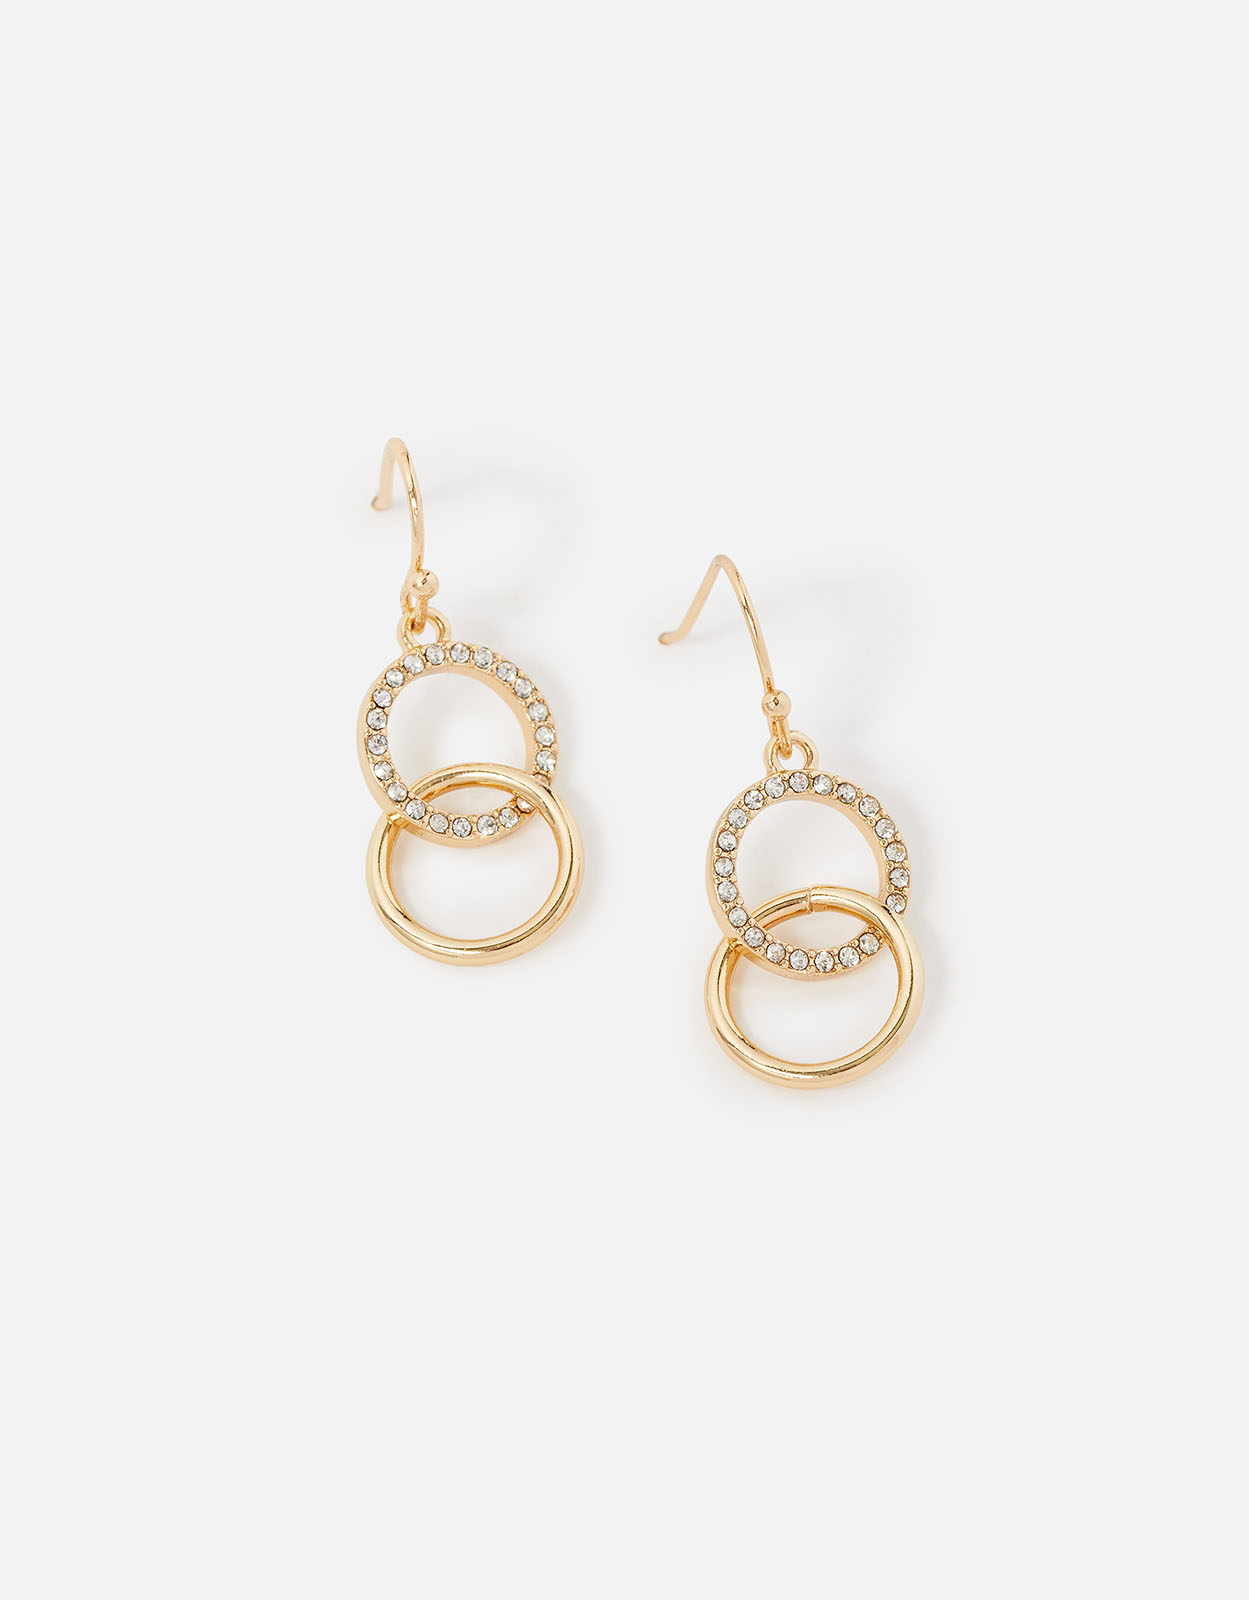 Accessorize Women's Linked Circle Short Drop Earrings Gold, Size: One Size